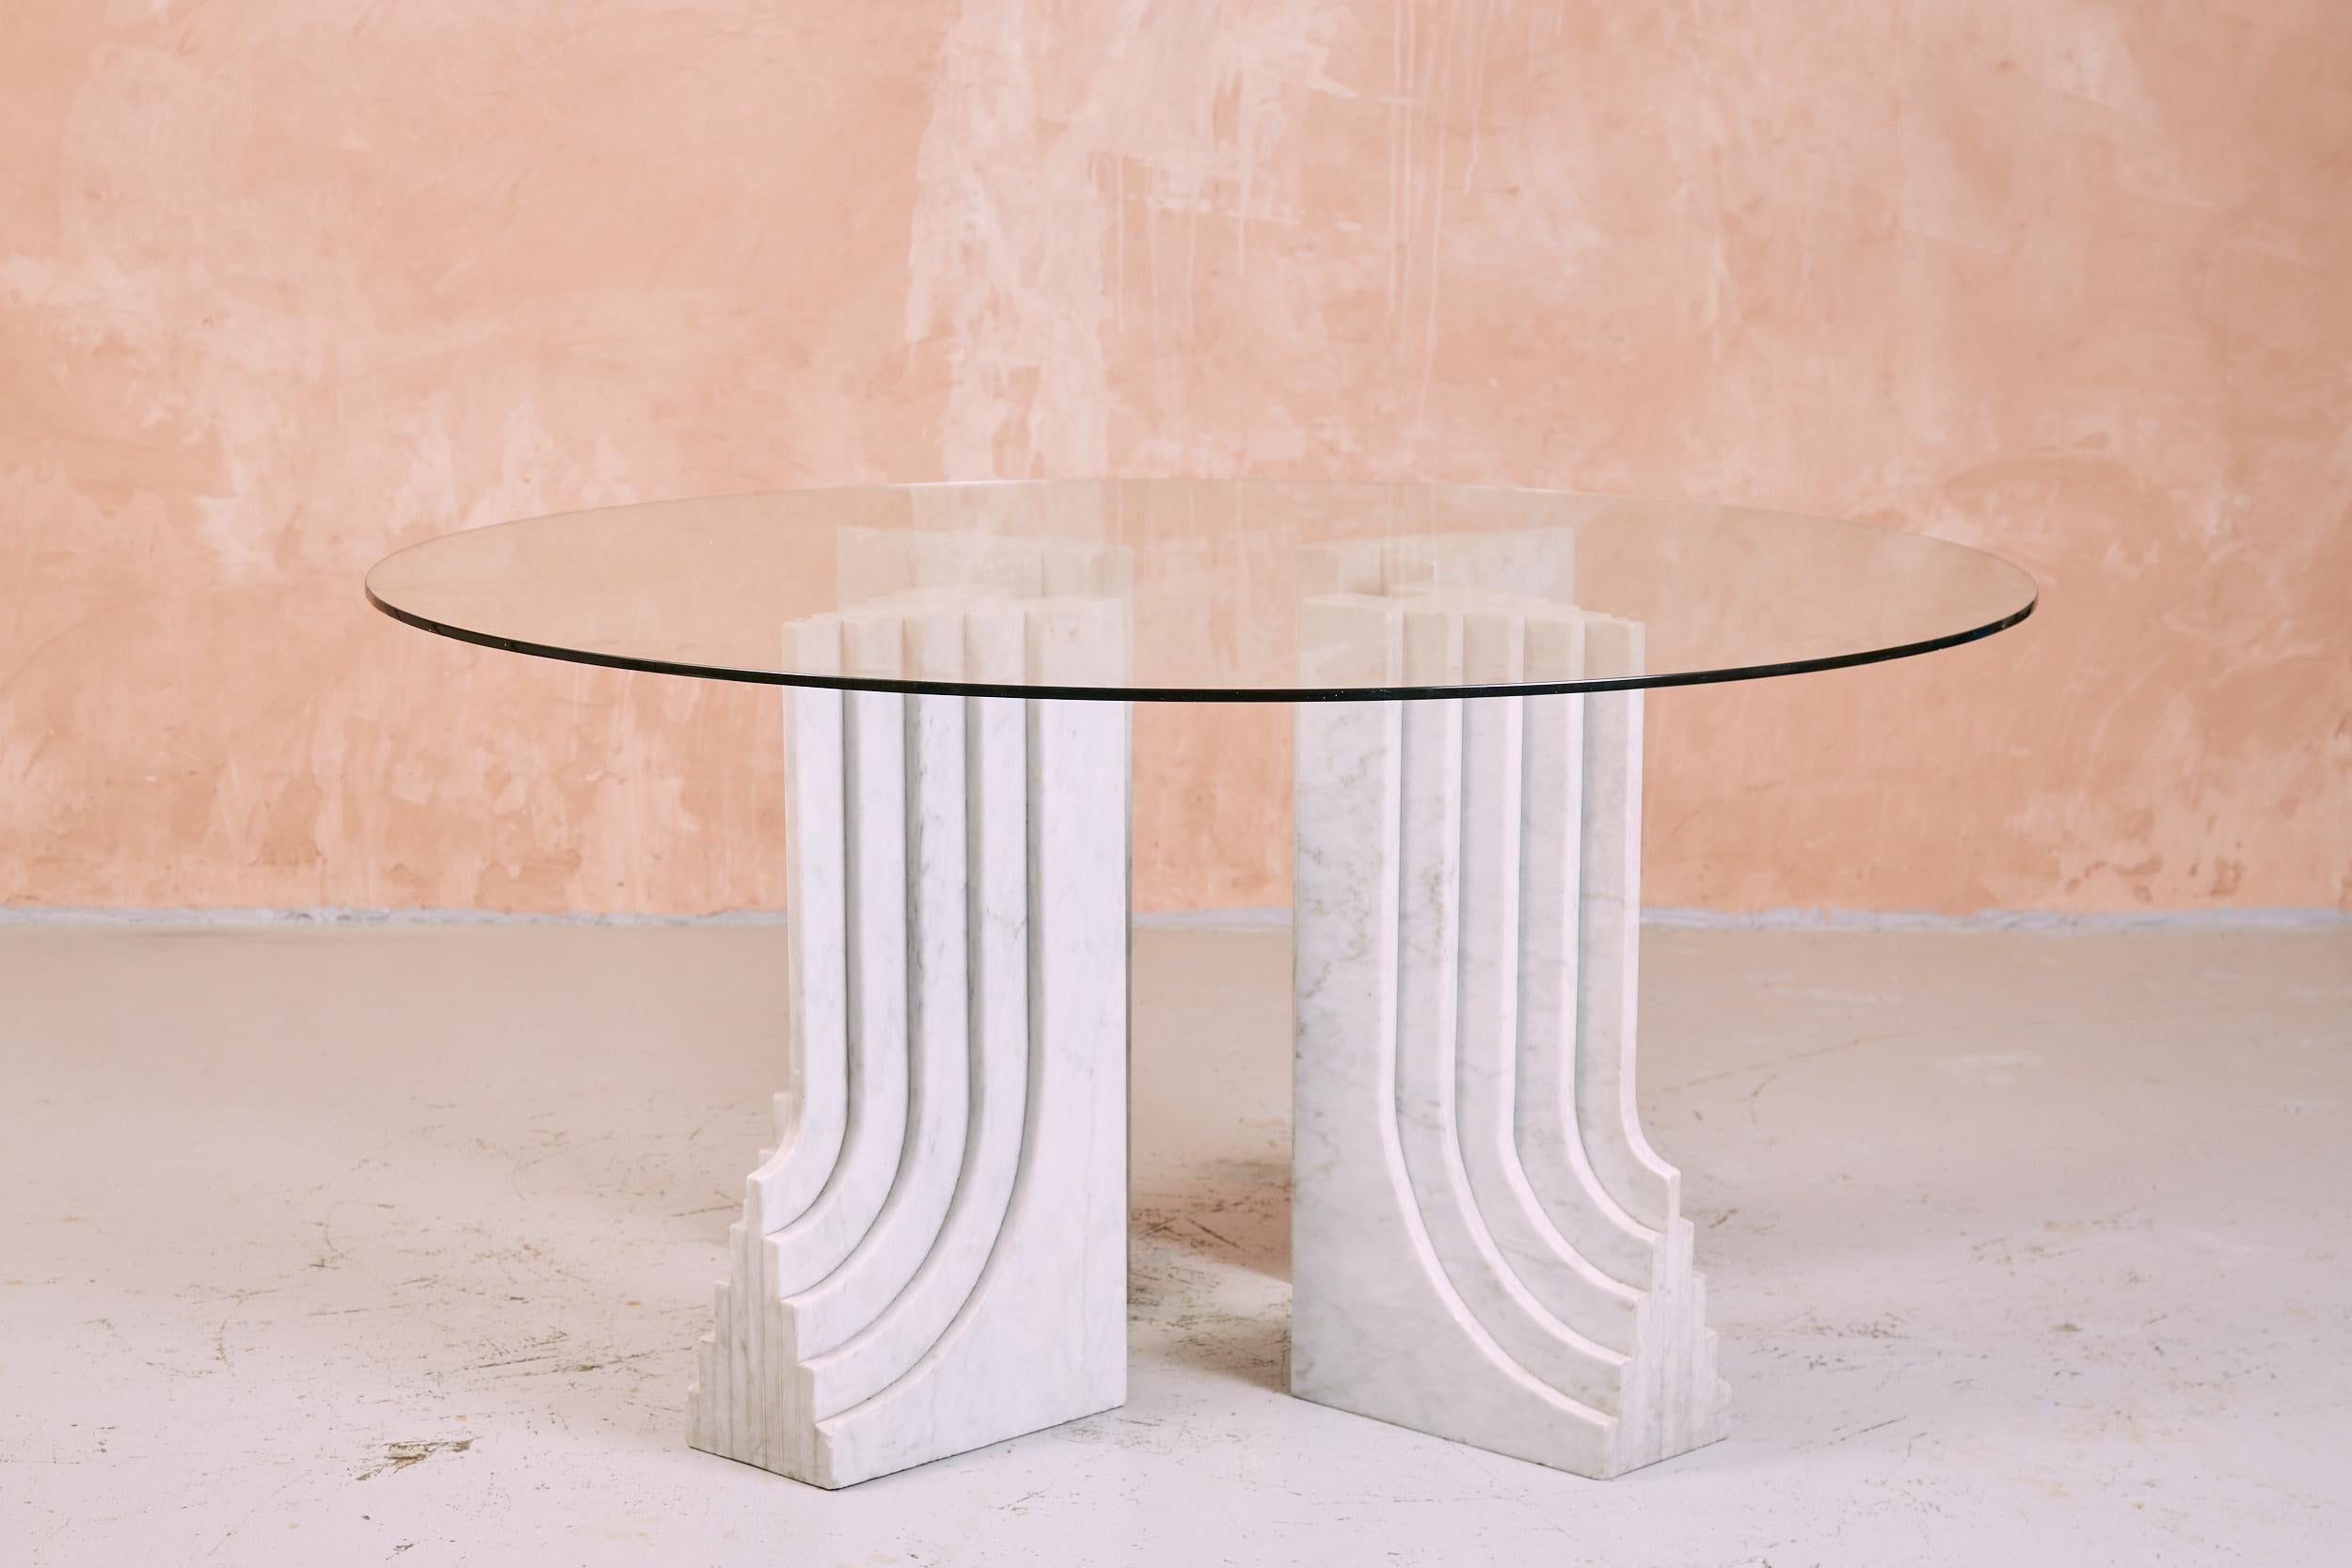 Four sculptural marble plinths combine to provide the base for this very large table.

While this table is not the Samo by the Scarpas, it is most certainly based upon it. The “Samo” dining table was designed in 1971 for 'Ultrarazionale'